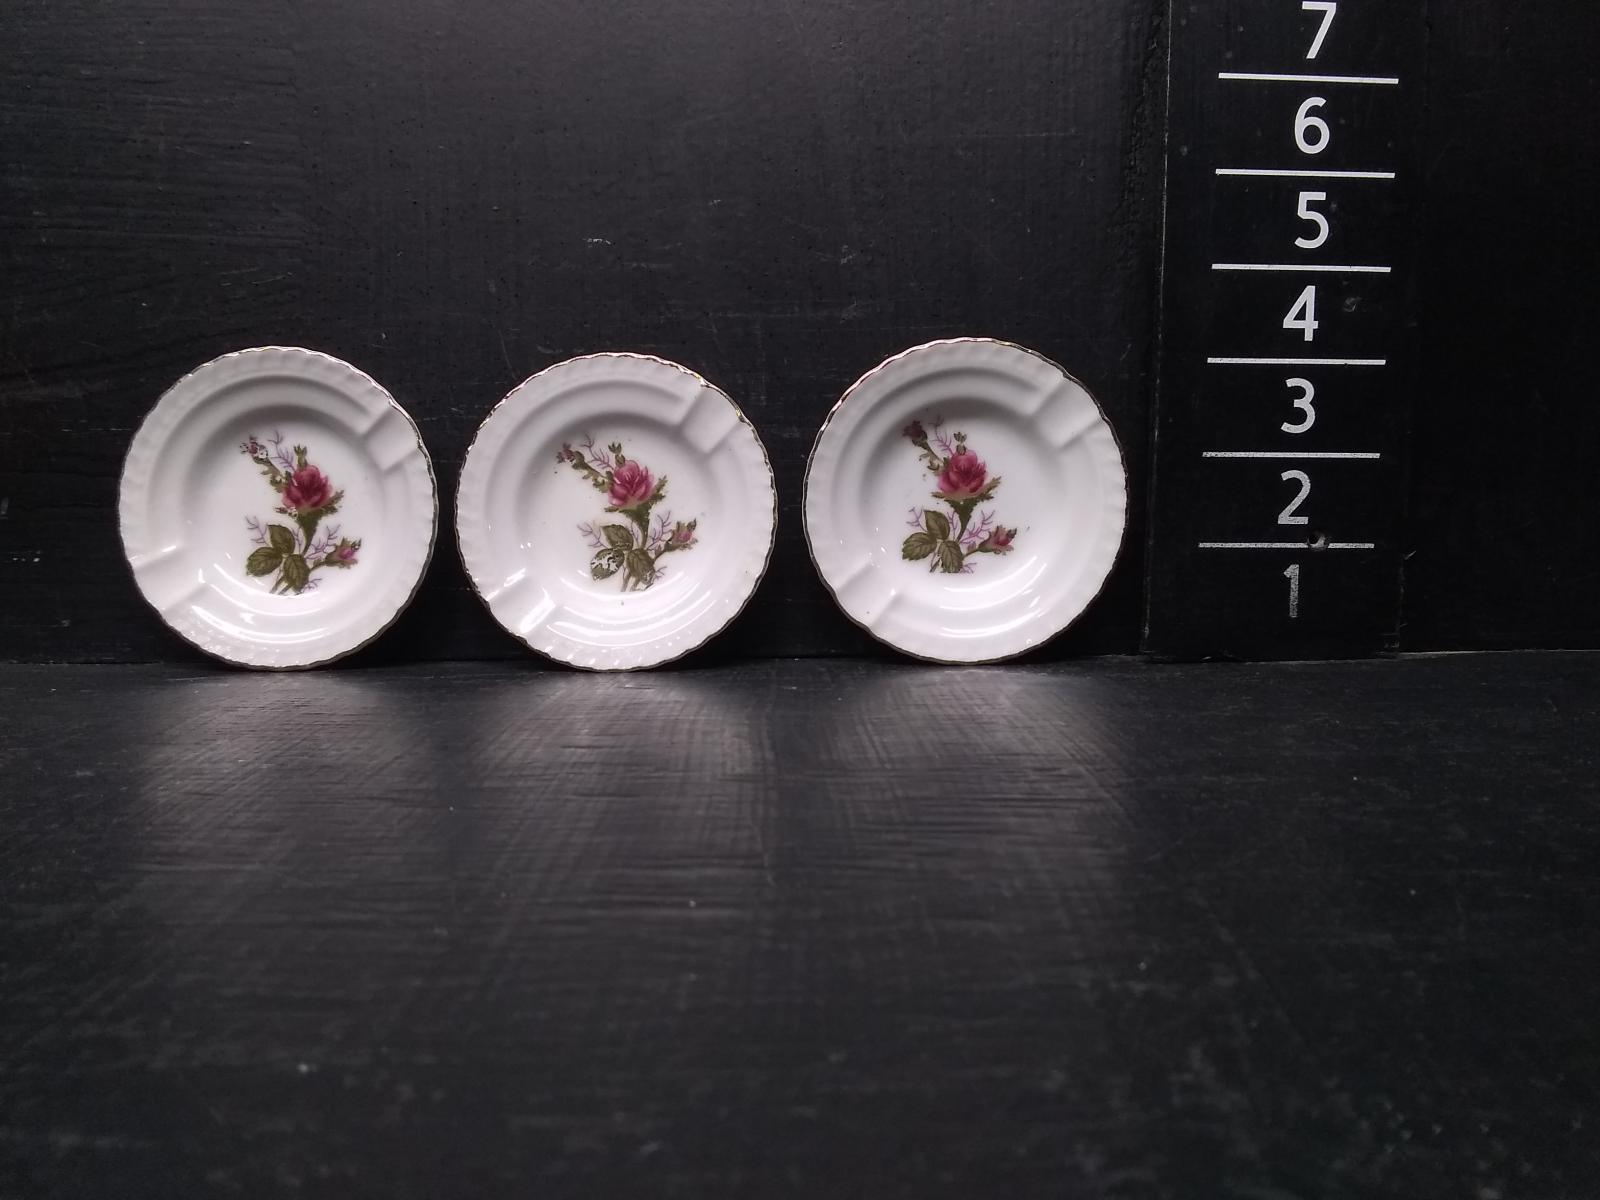 (3) Vintage Petite Ashtray -Roses Made in Japan